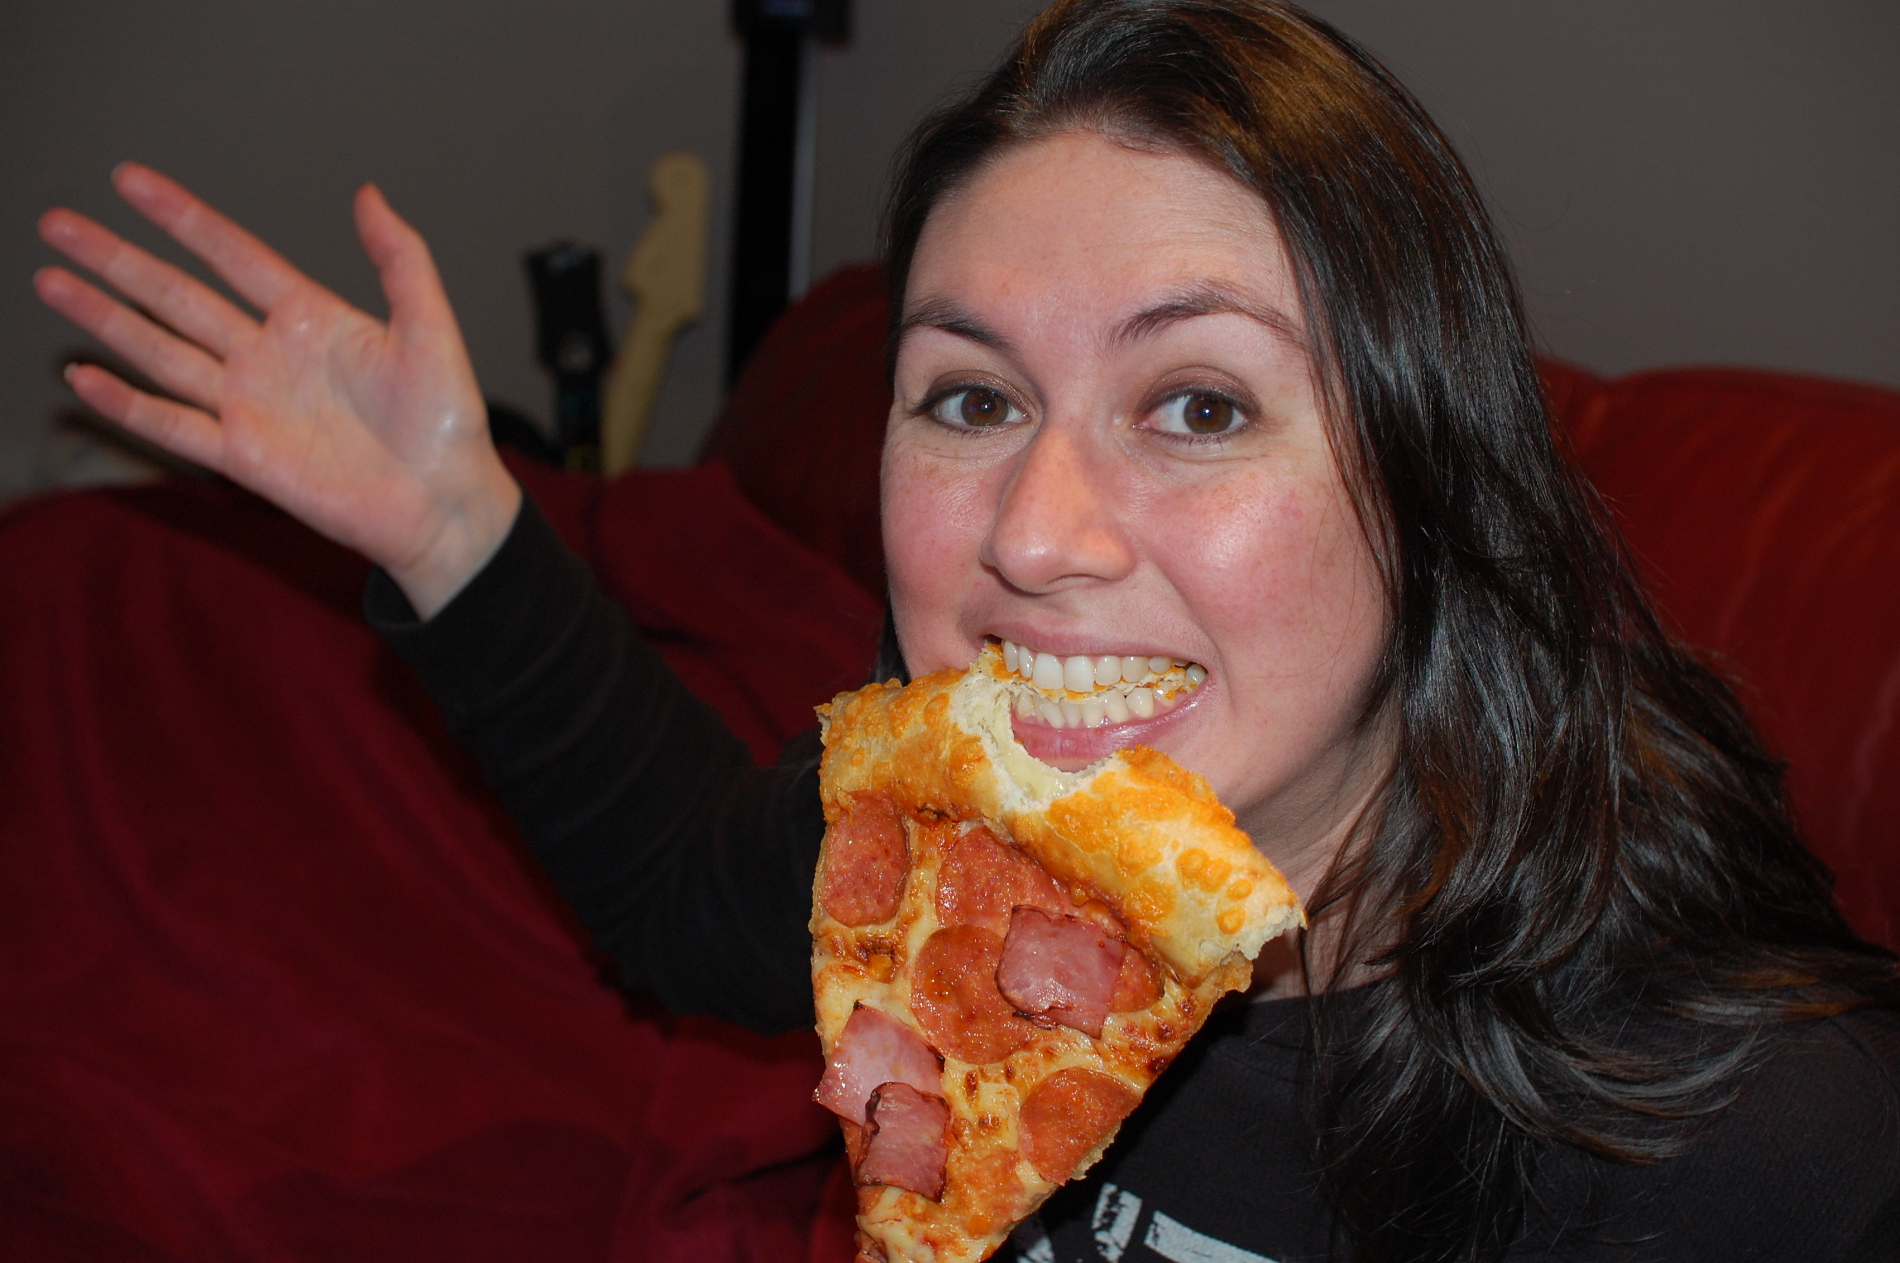 Halo 4 Stuffed Crust Pizza Review – The Average Gamer